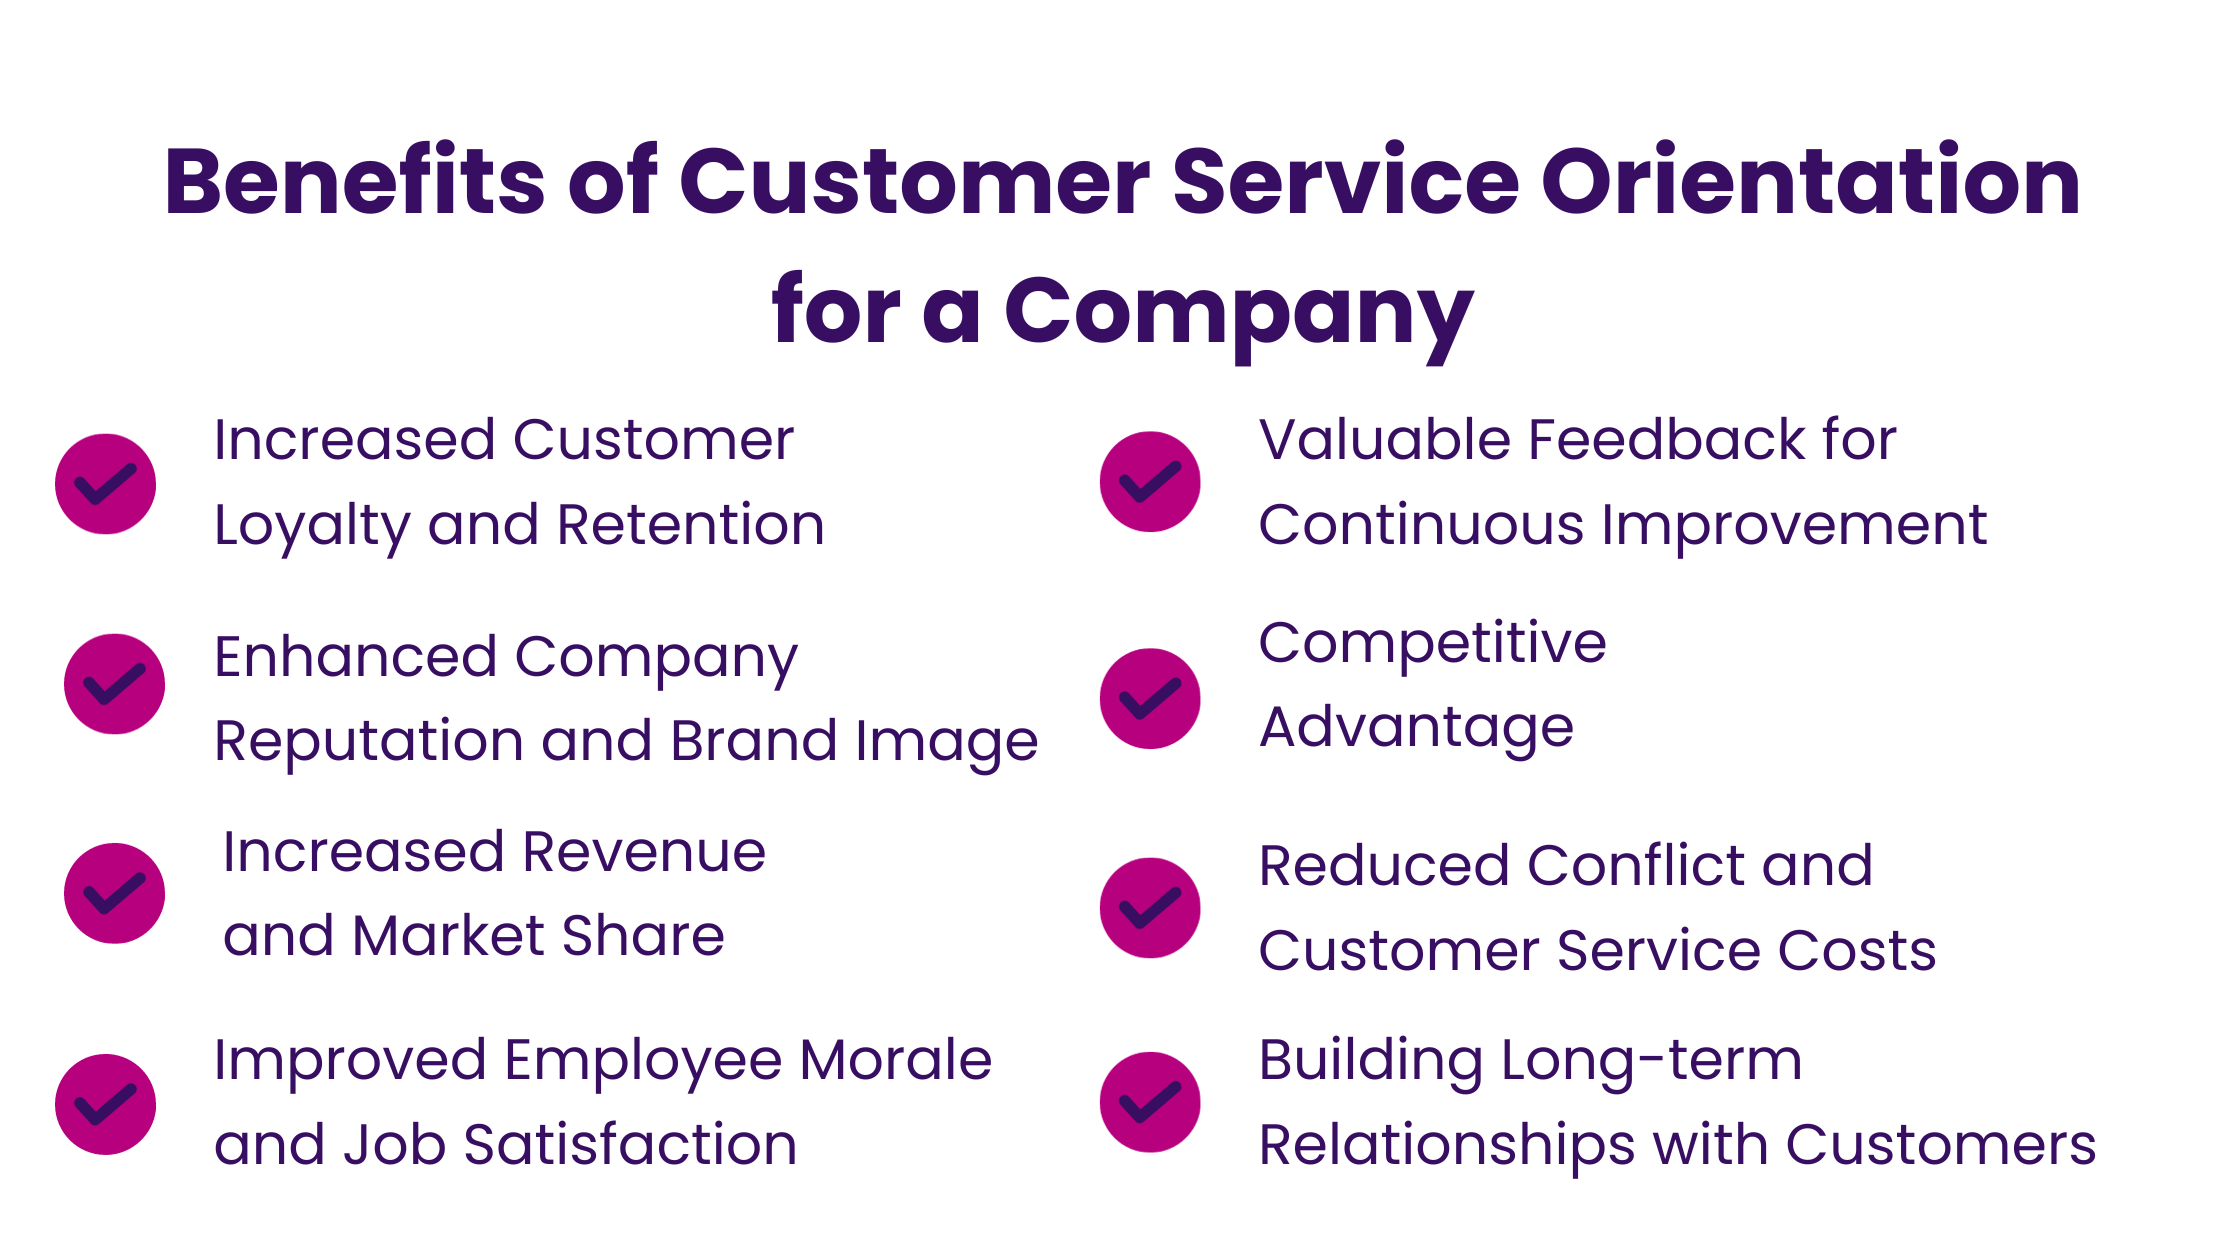 Benefits of Customer Service Orientation for a Company